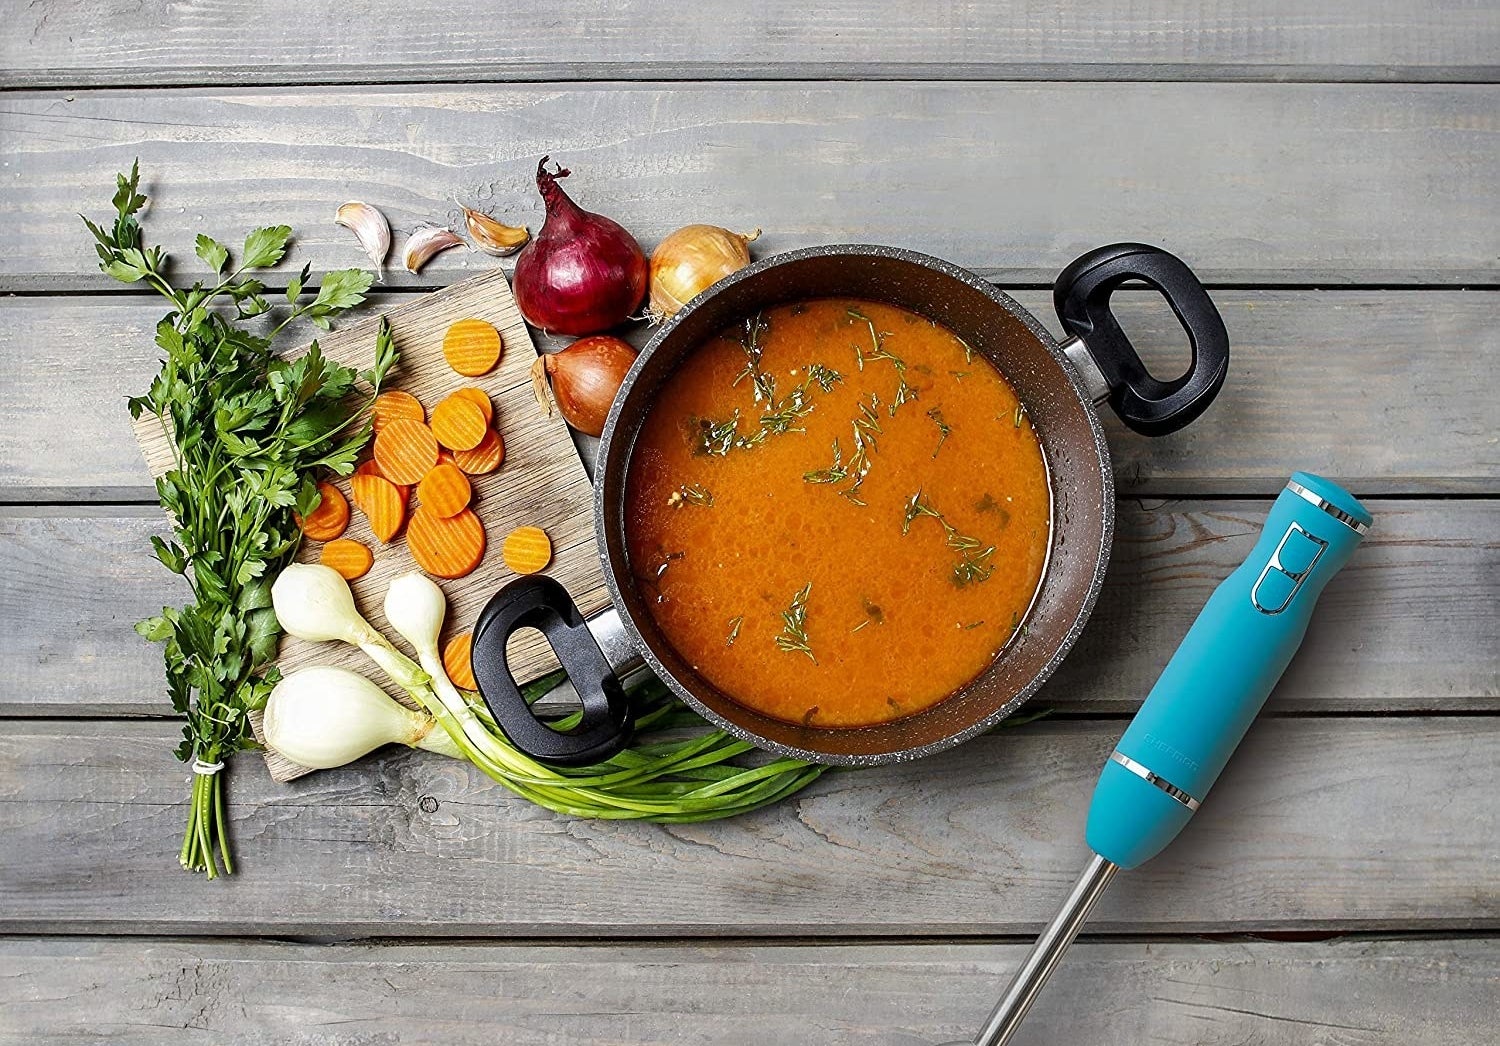 An immersion blender beside a pot of soup and with veggies on a cutting board